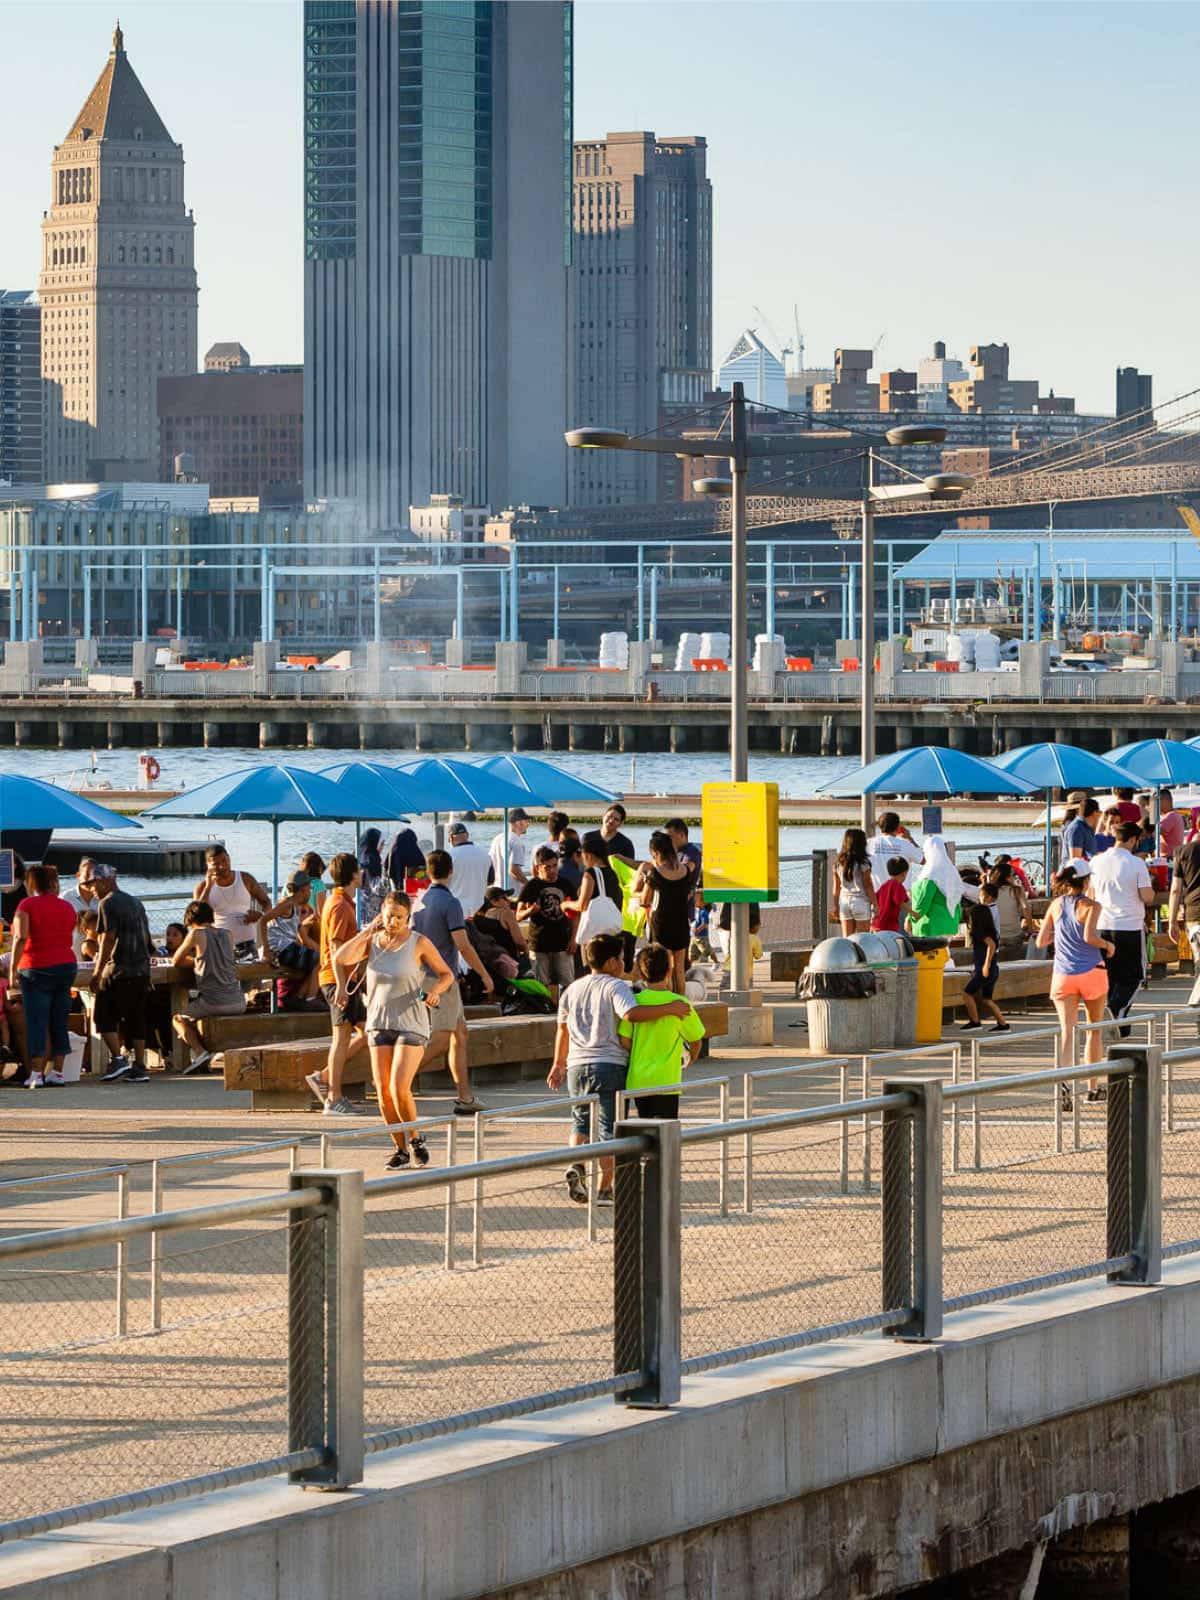 People walking by picnic tables at sunset with lower Manhattan in the background.